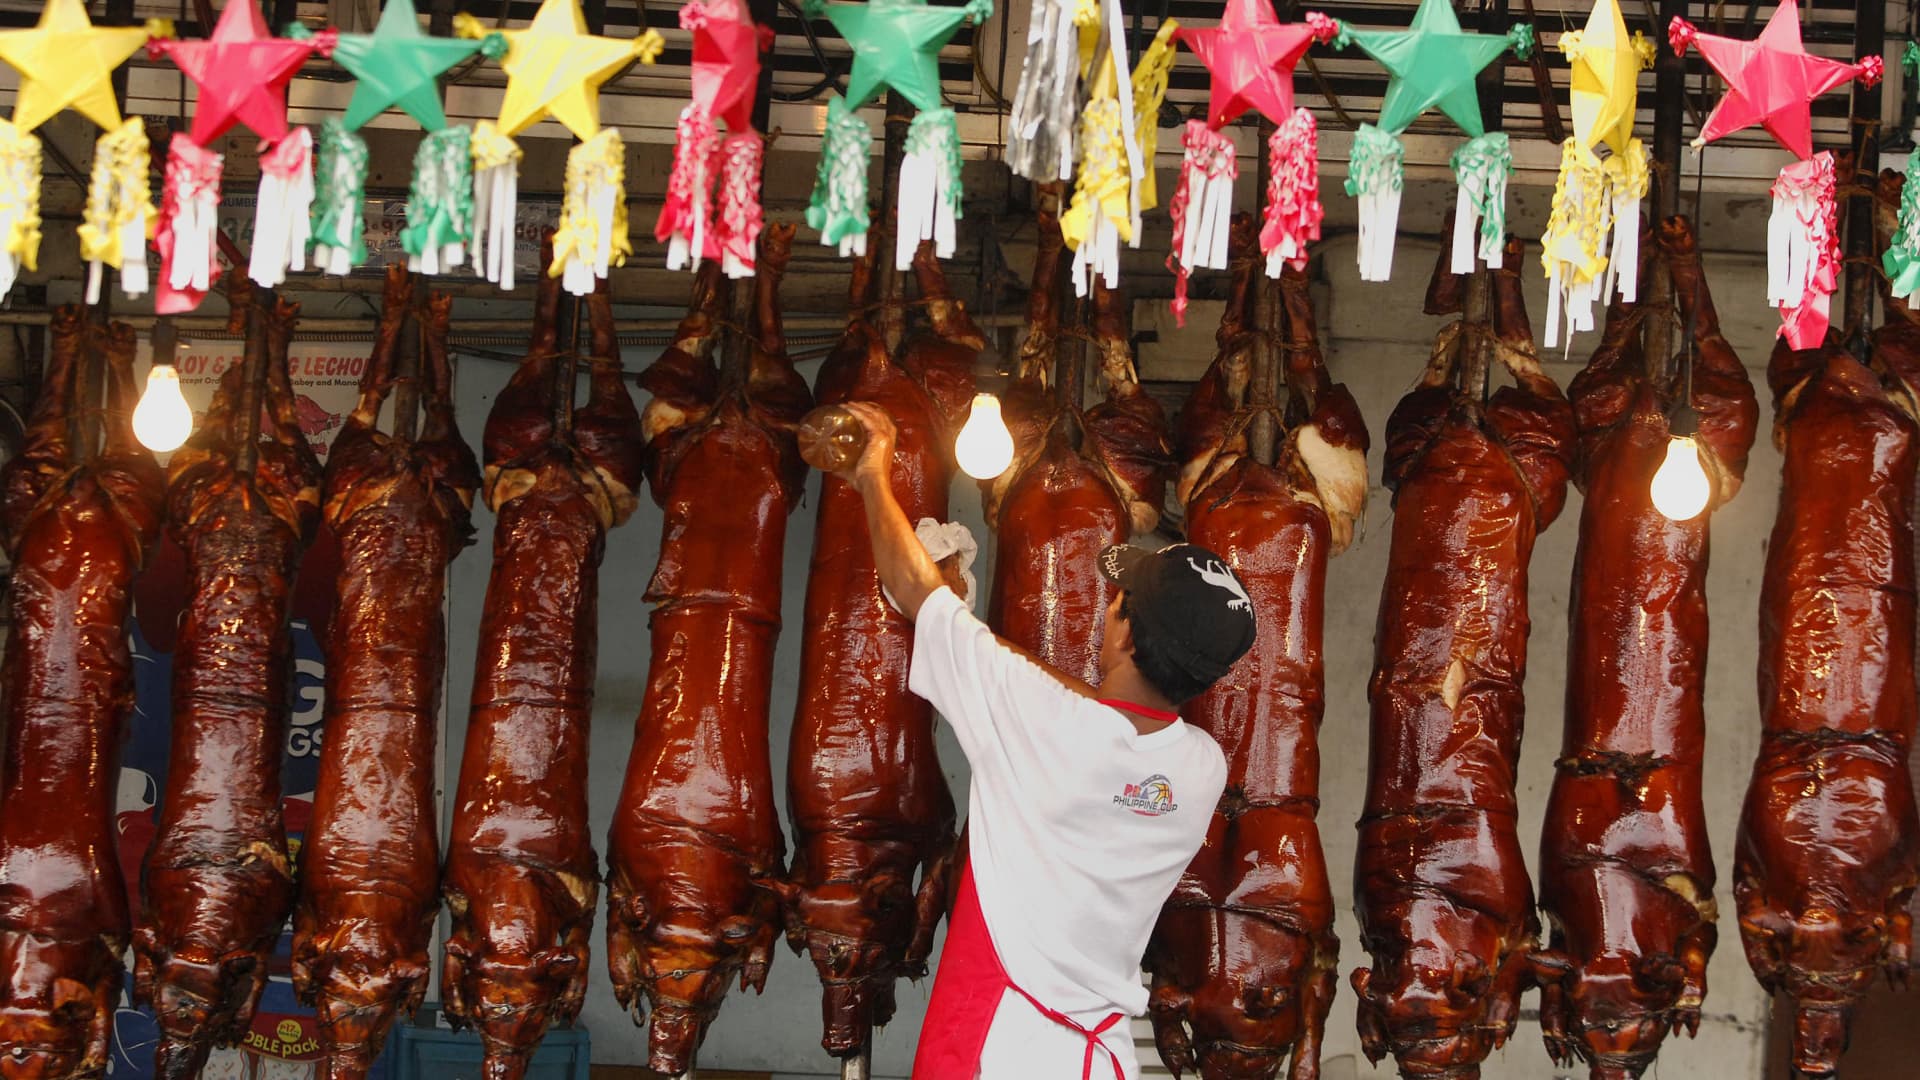 For many Filipino families, Christmas is incomplete without lechon, a whole crispy-skinned roasted pig.